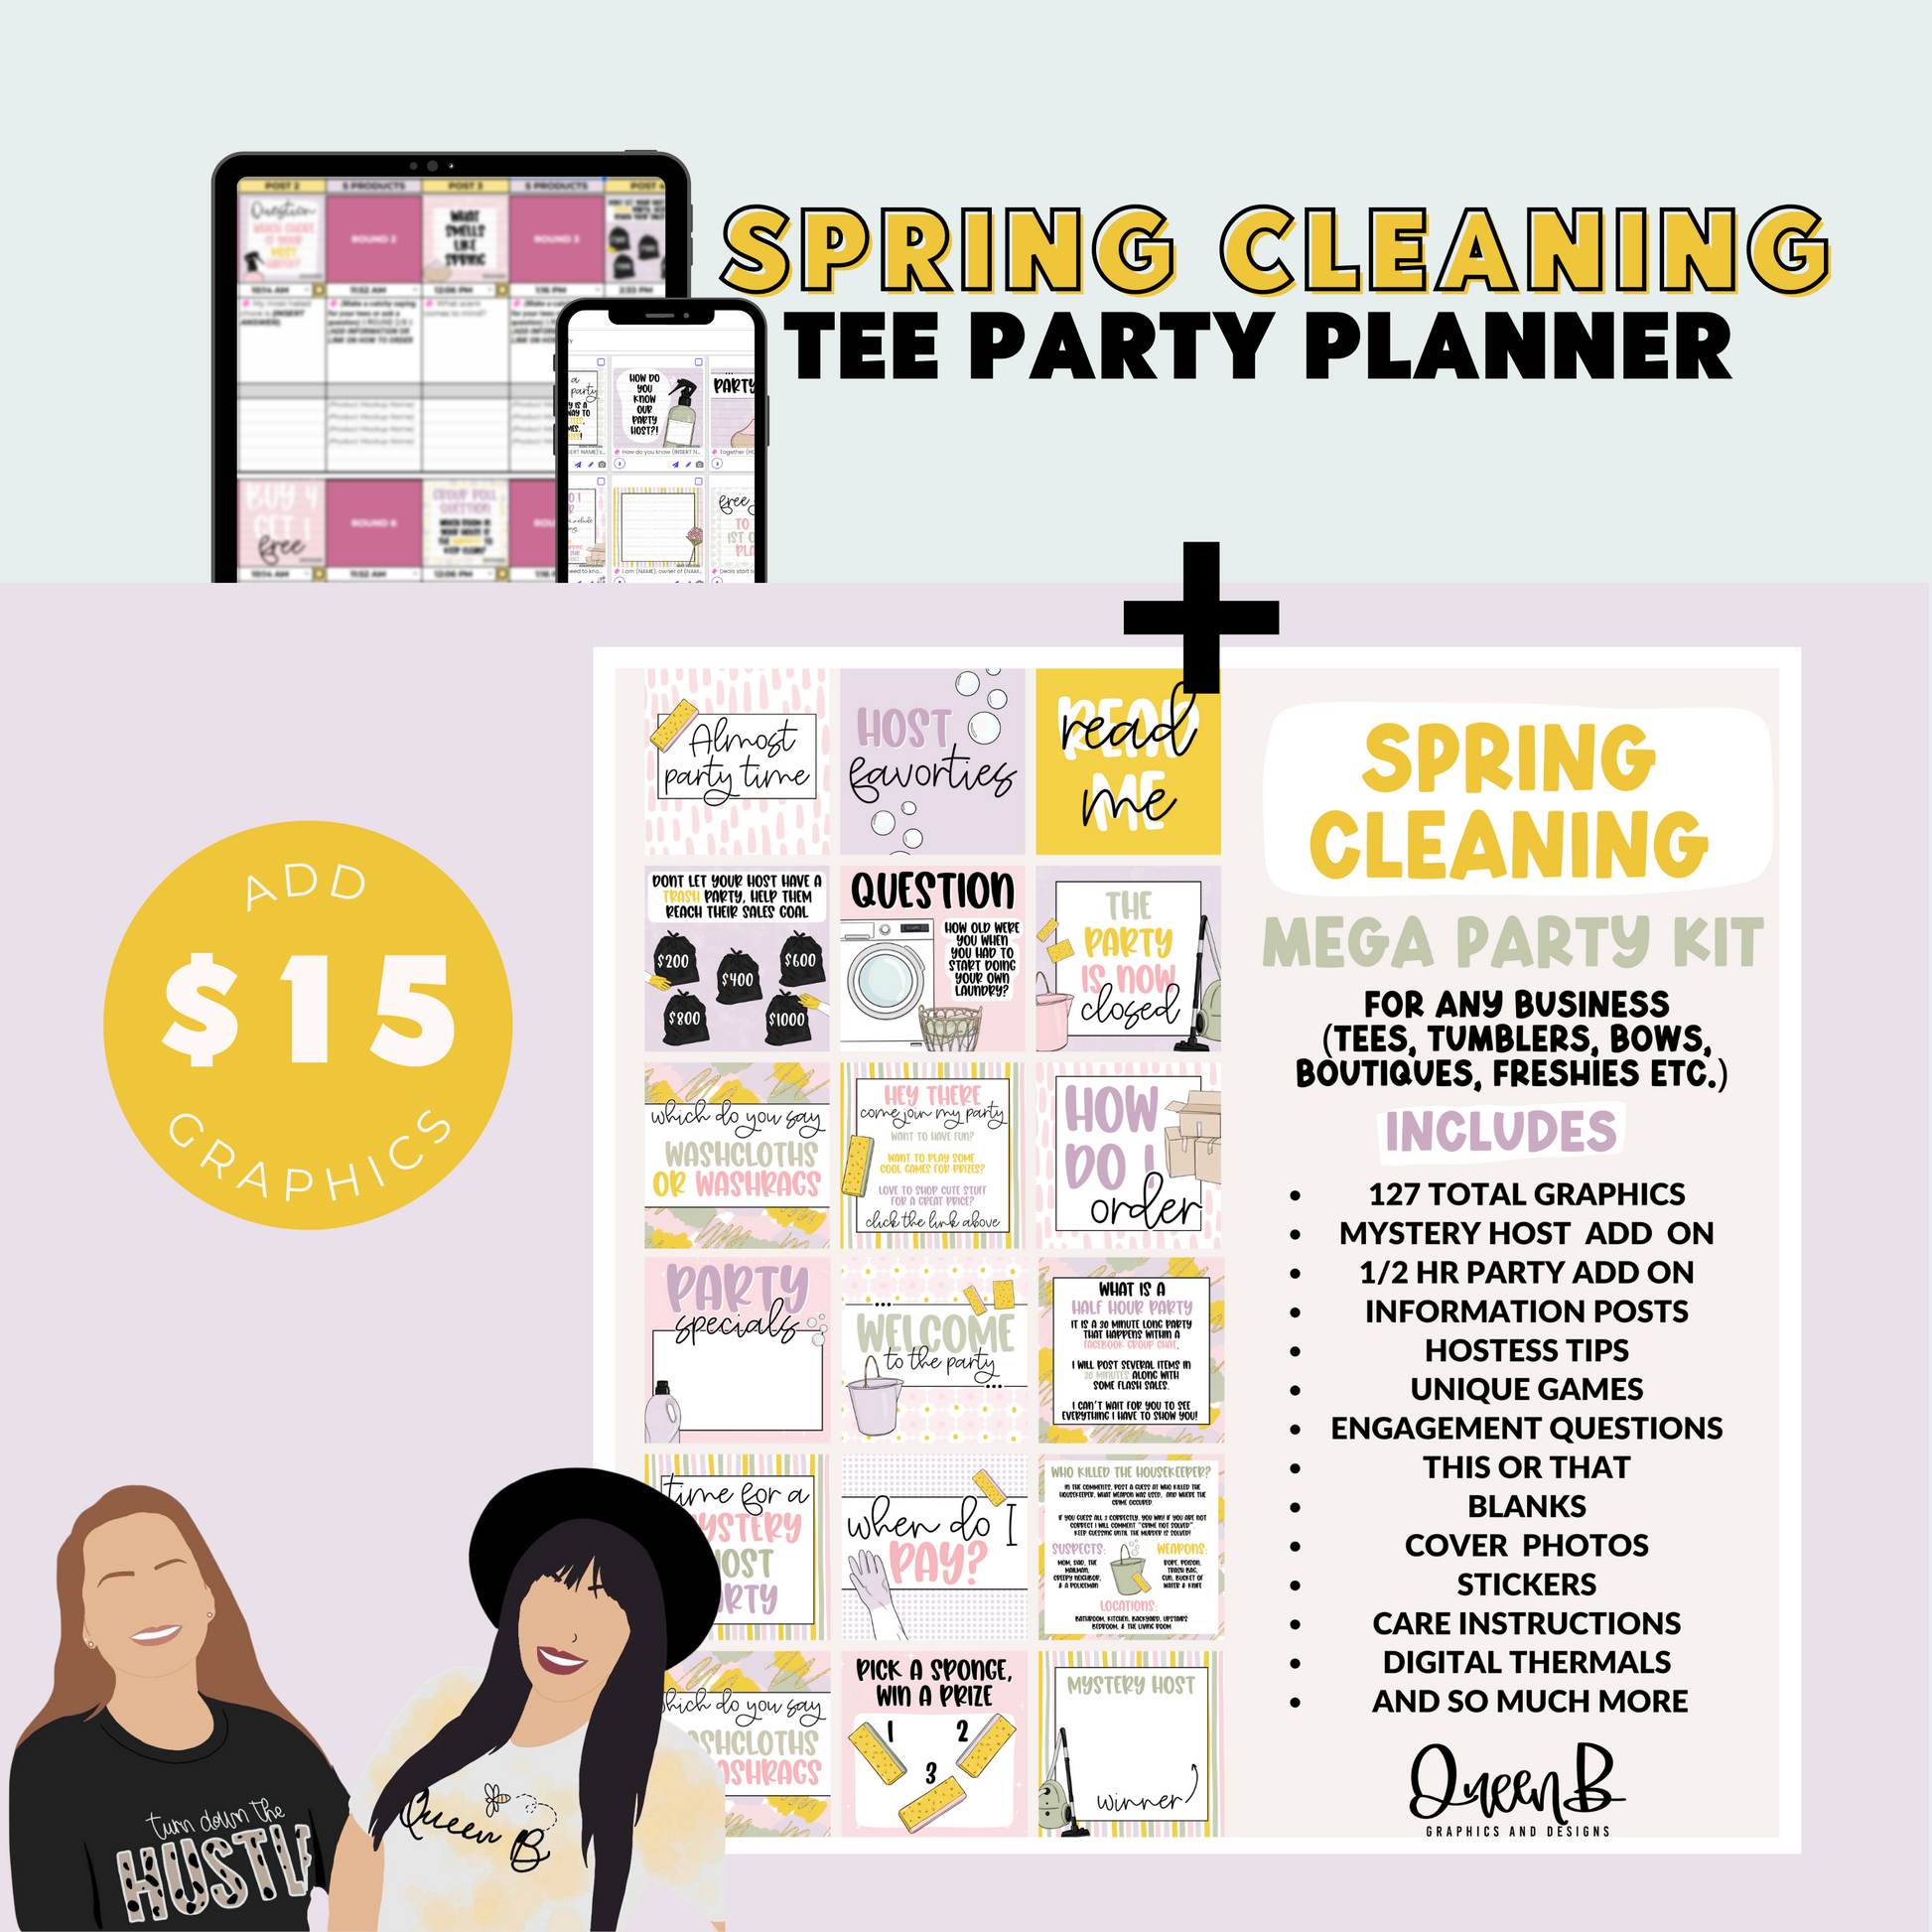 Spring Cleaning Tee Party Planner | Sun Kissed Virtual Assistant